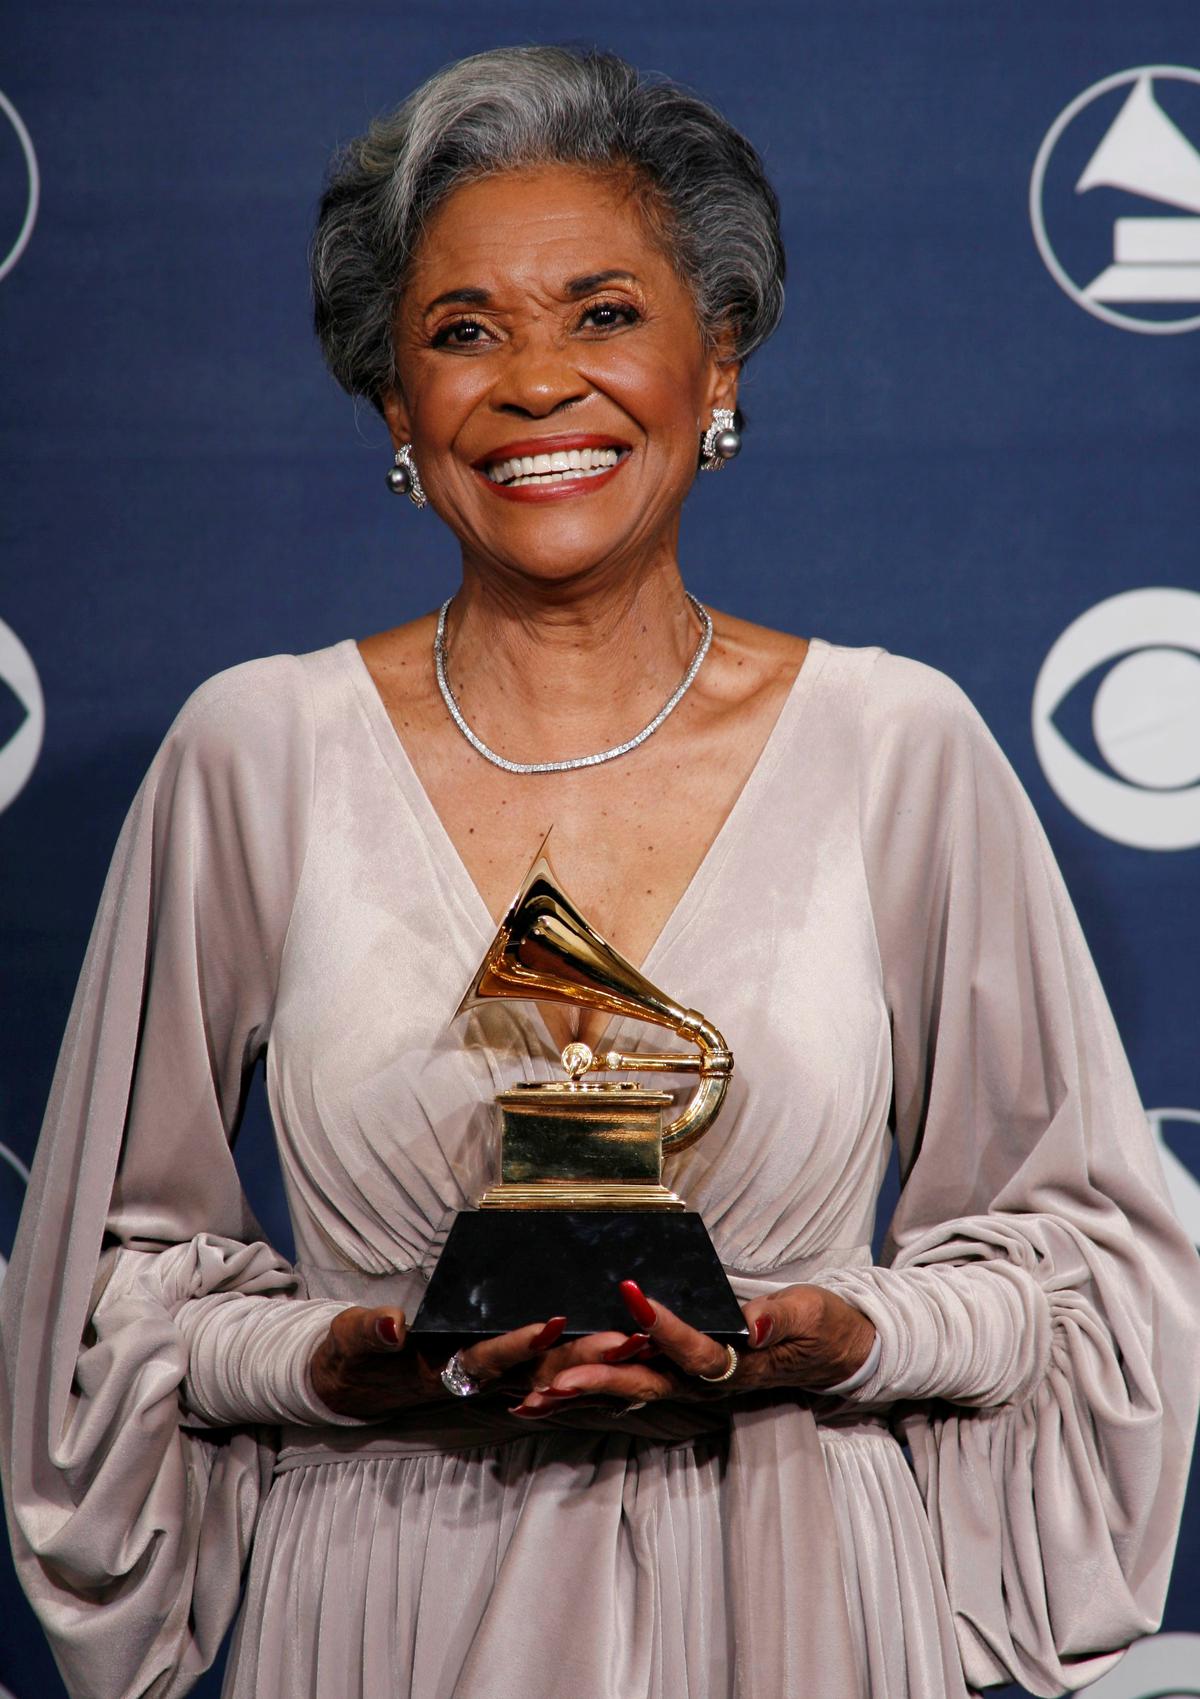 Singer Nancy Wilson holds her Grammy for Best Jazz Vocal Album for ‘Turned To Blue’ at the 49th Annual Grammy Awards in Los Angeles on February 11, 2007.  